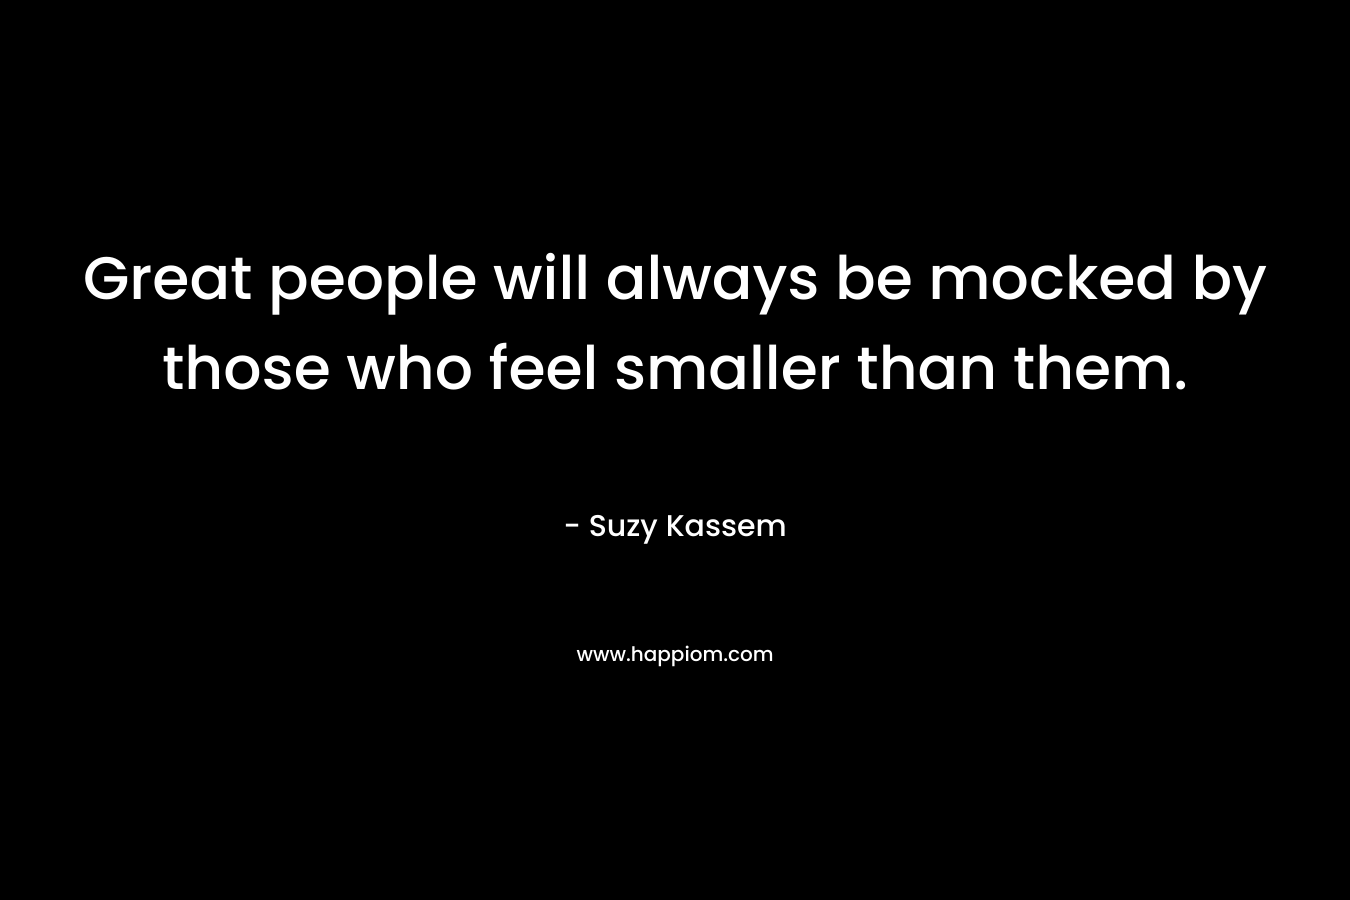 Great people will always be mocked by those who feel smaller than them.